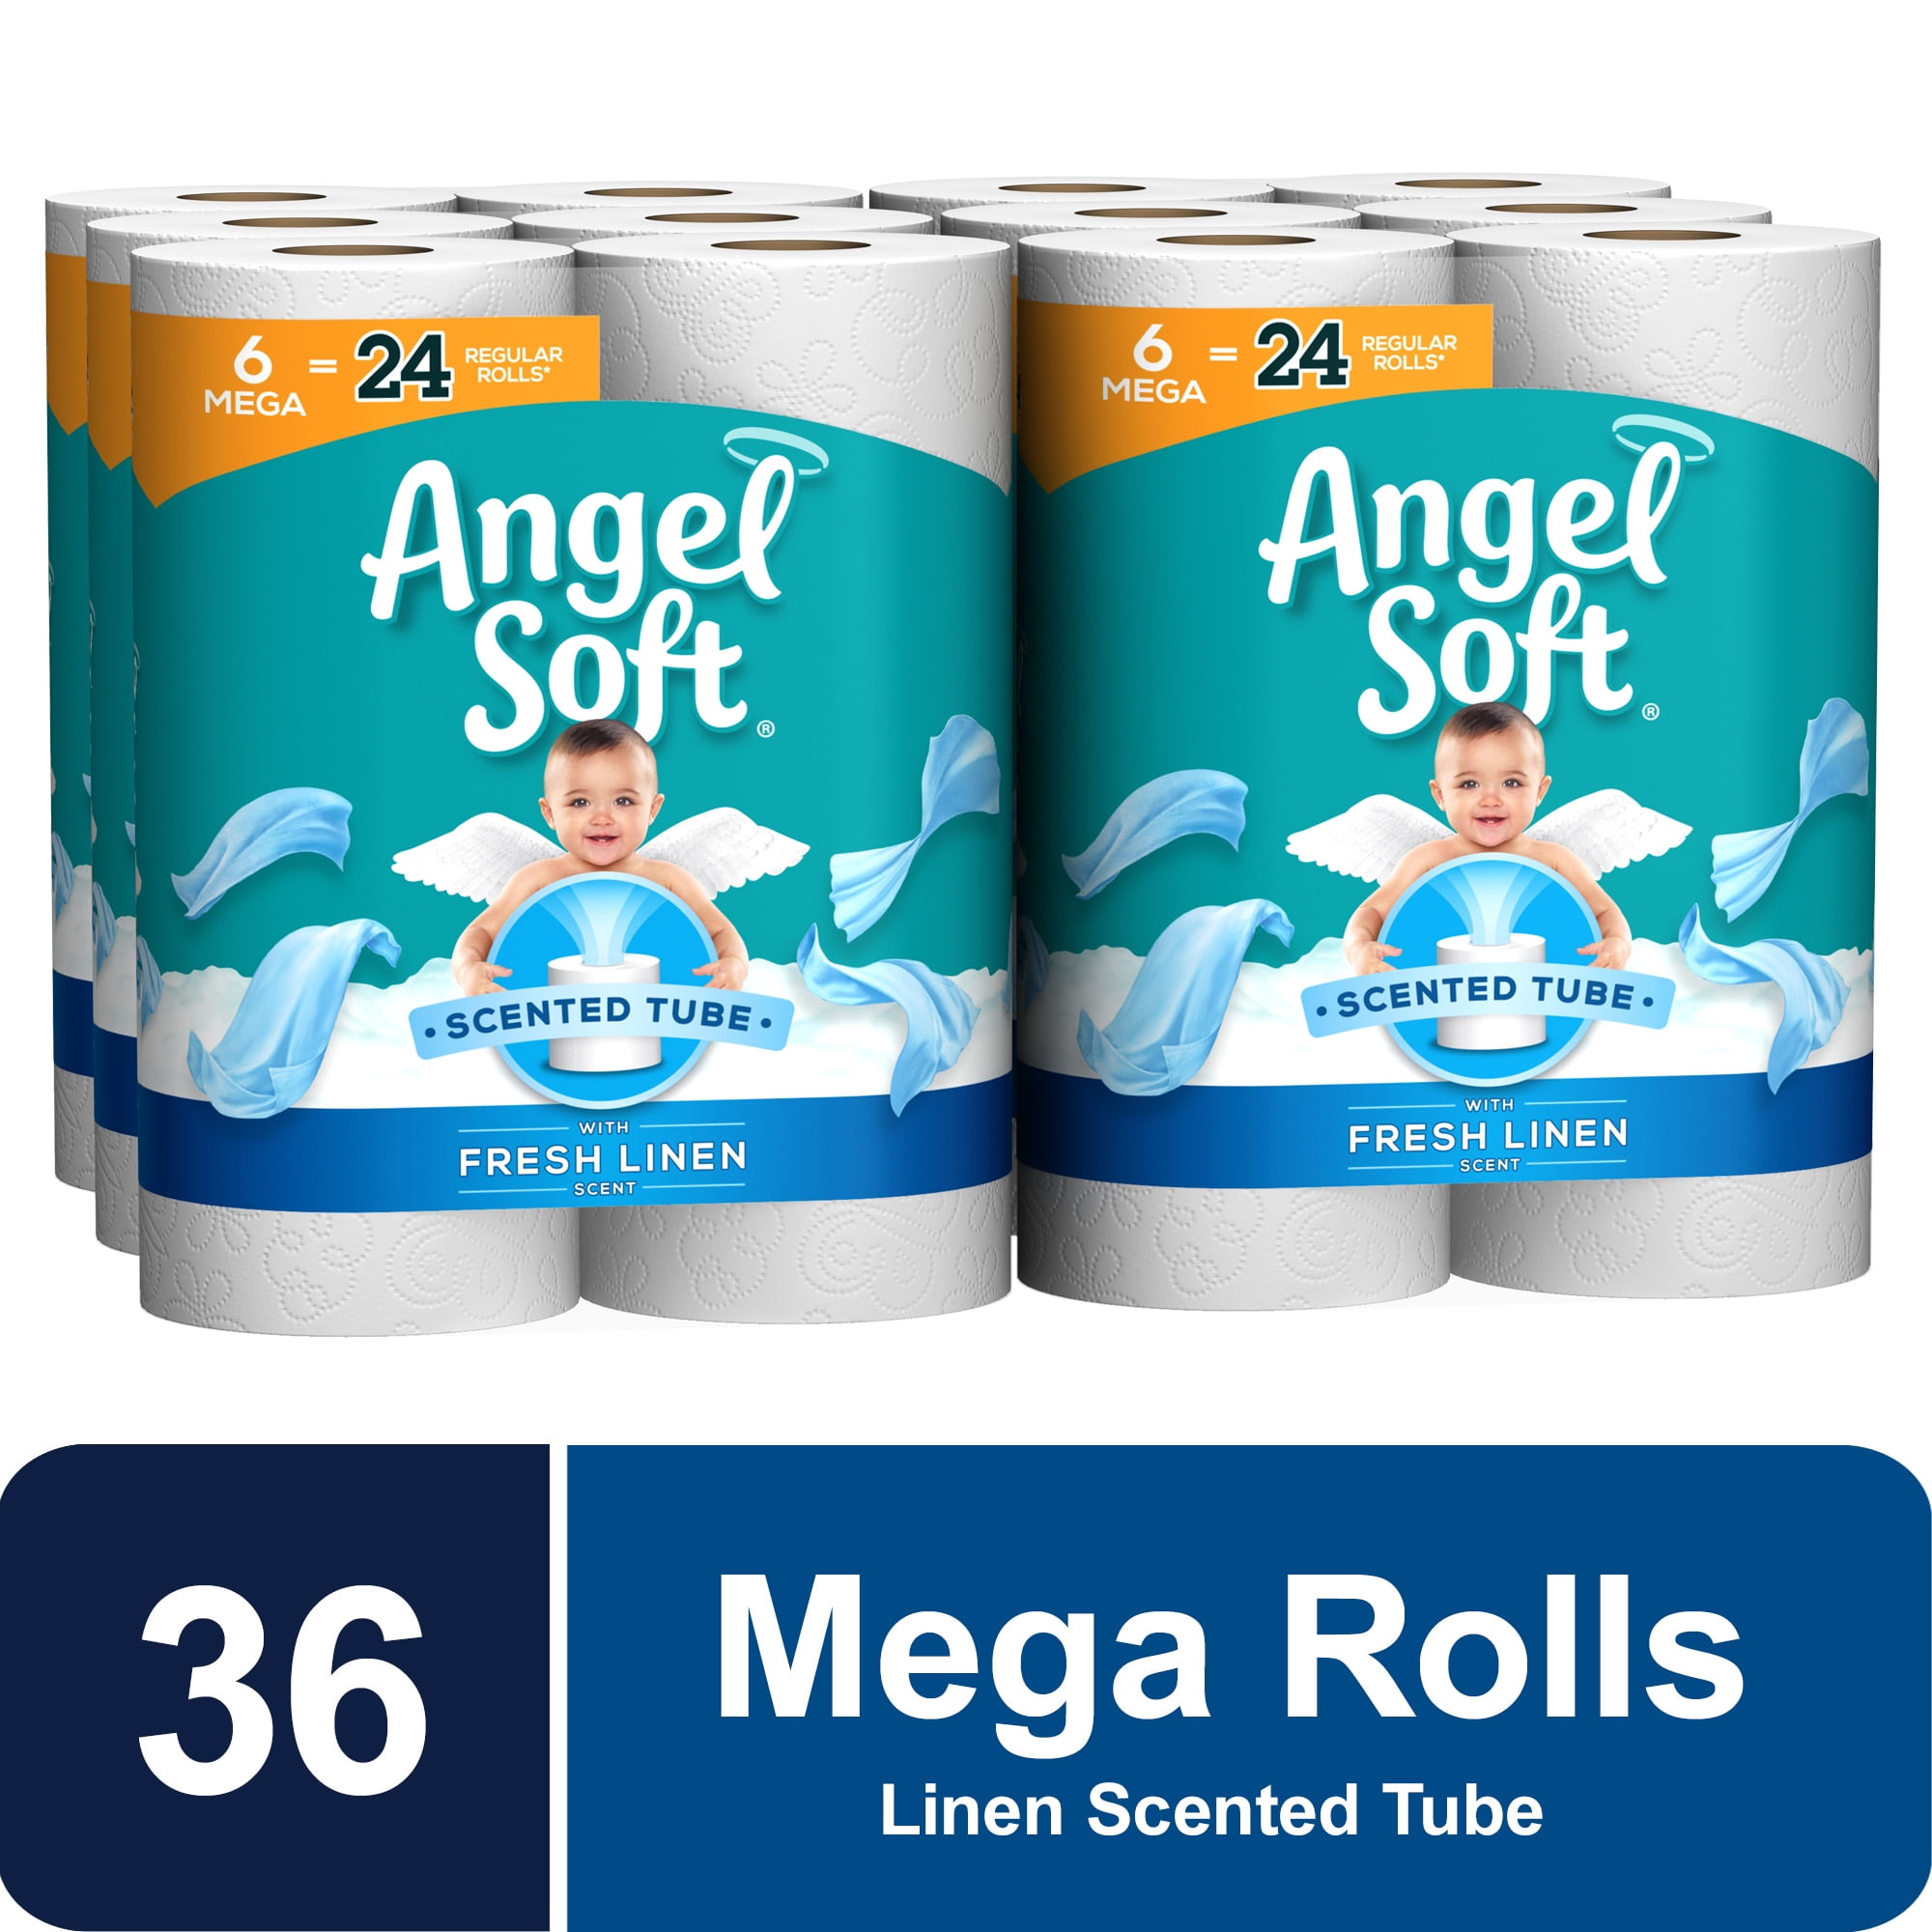 Details about   Soft Toilet Paper with Fresh Linen Scent 48 Double Rolls= 96 Regular 2-Ply Best 